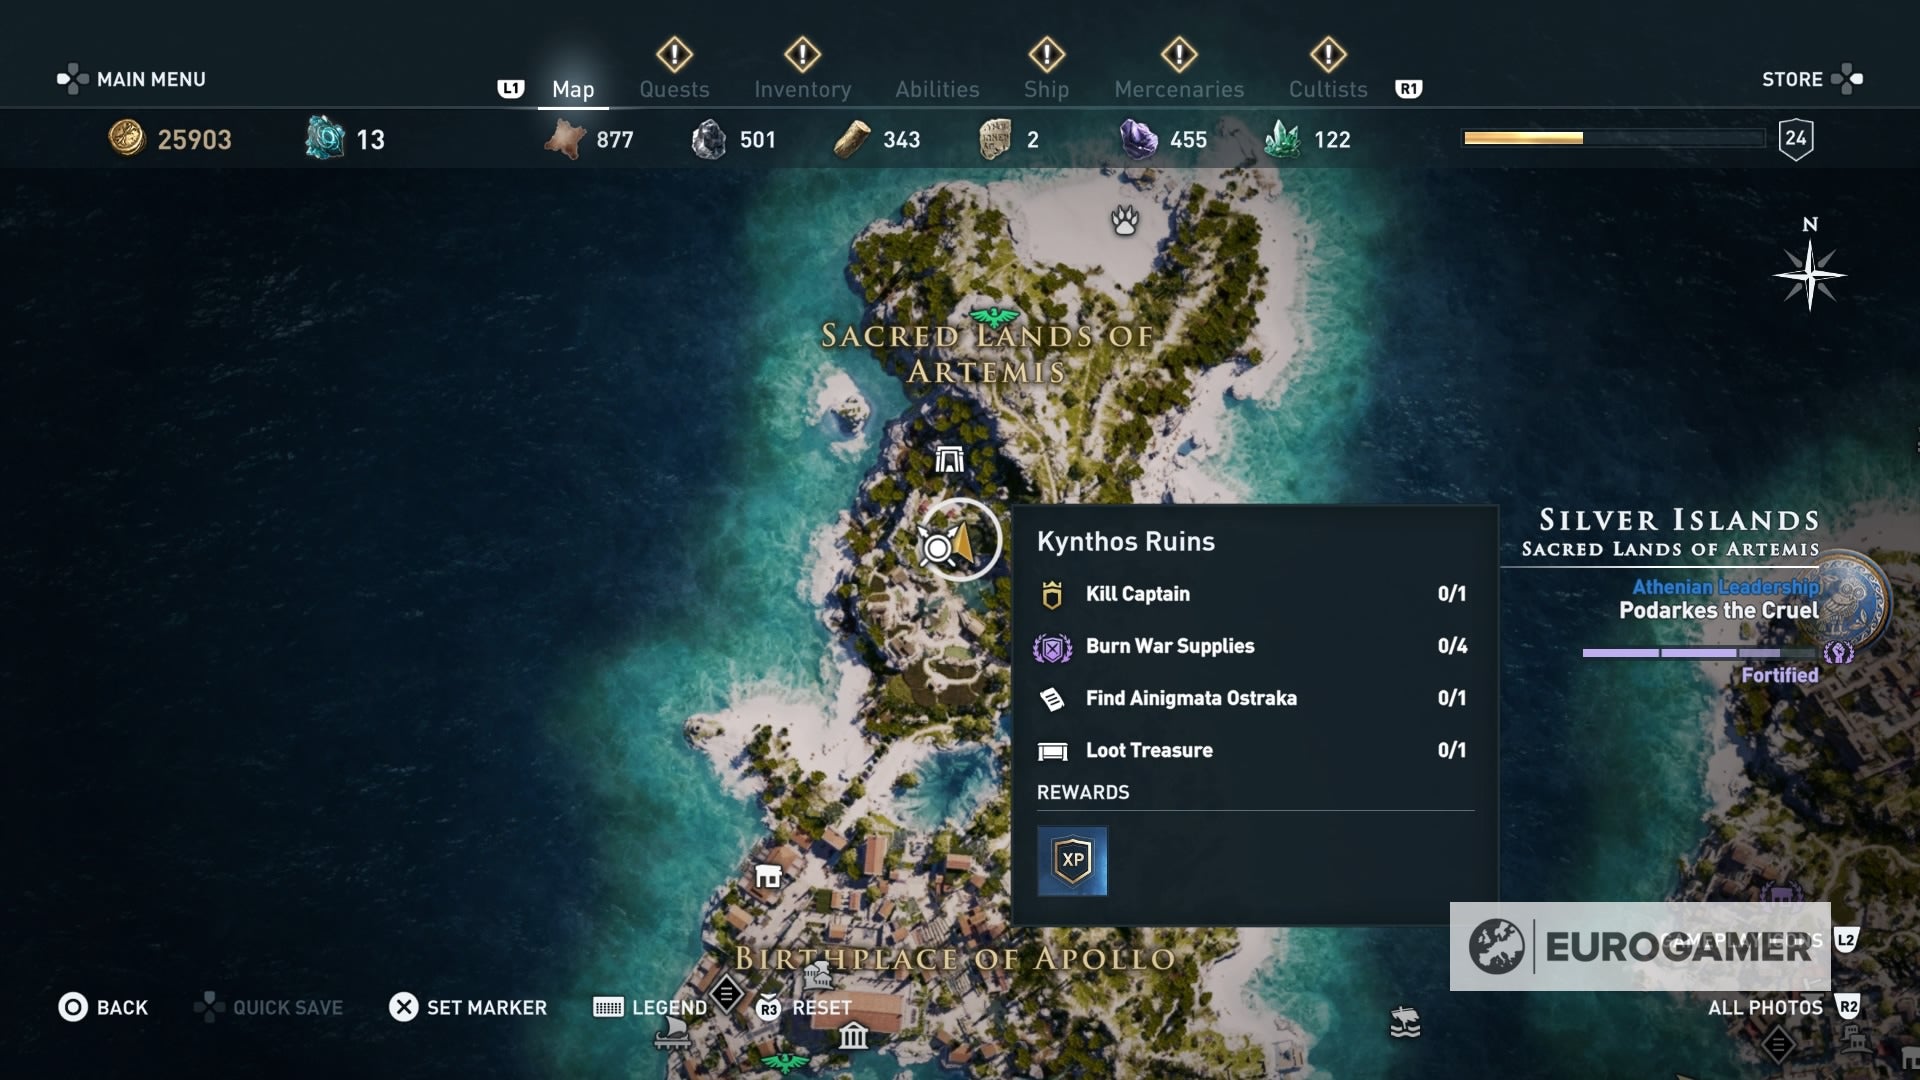 Assassin's Creed Odyssey - Needle in a Haystack, Grave Discovery riddle solutions and where to the Sunken Wreck Datis, Kynthos Ruins tablets |